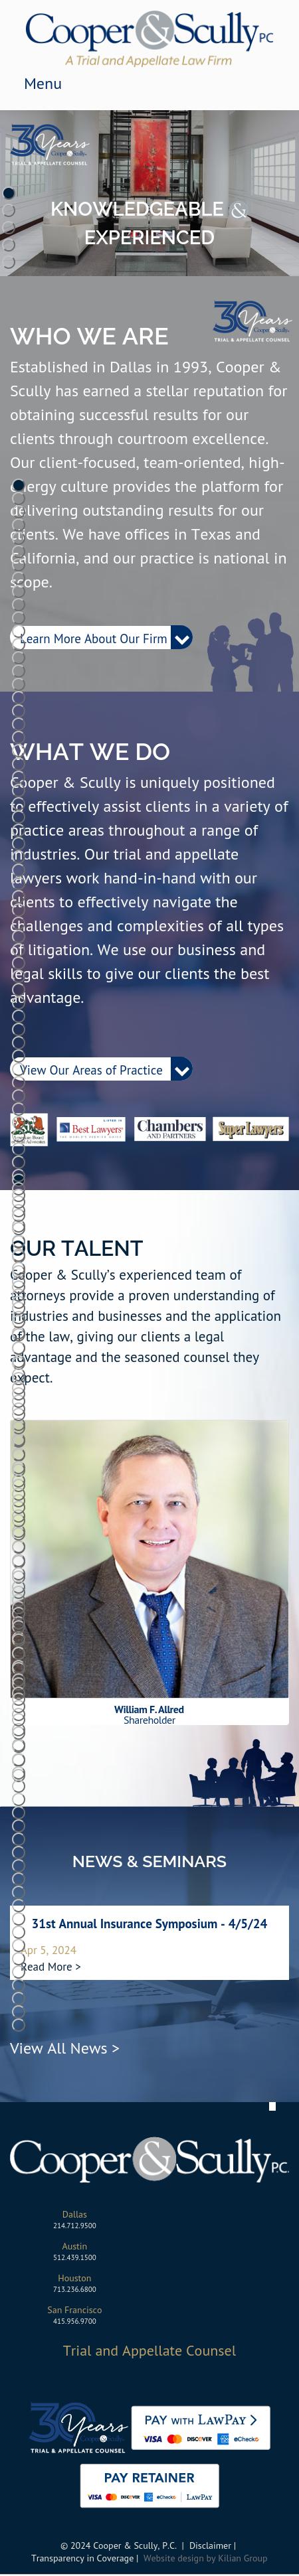 Cooper & Scully, P.C. - Dallas TX Lawyers